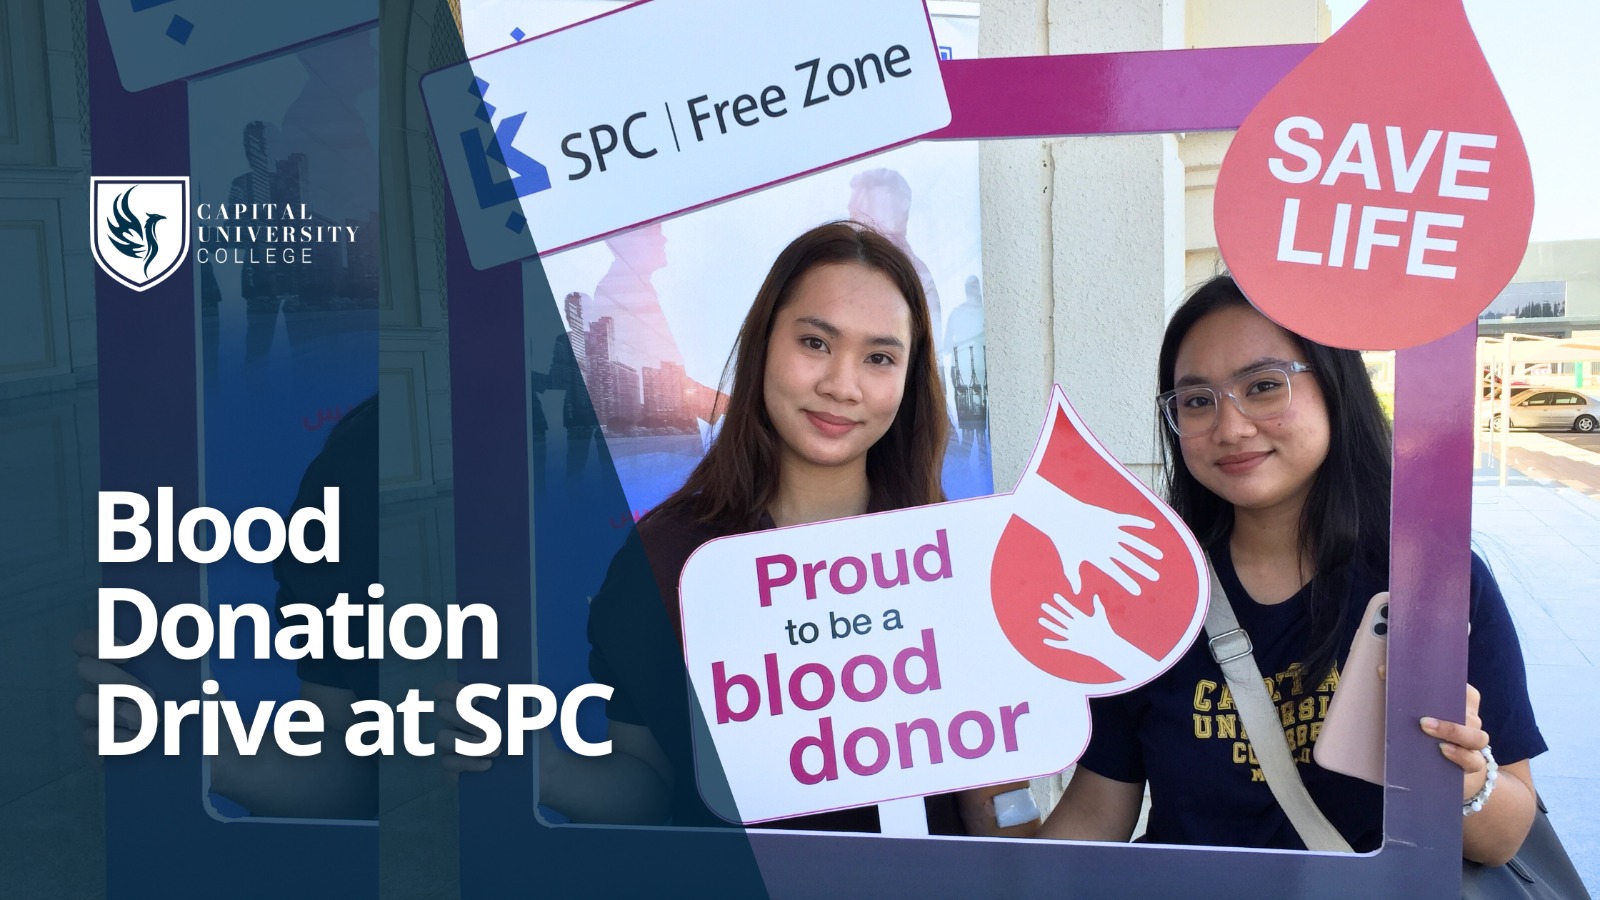 Blood Donation Drive at SPC | Capital University College